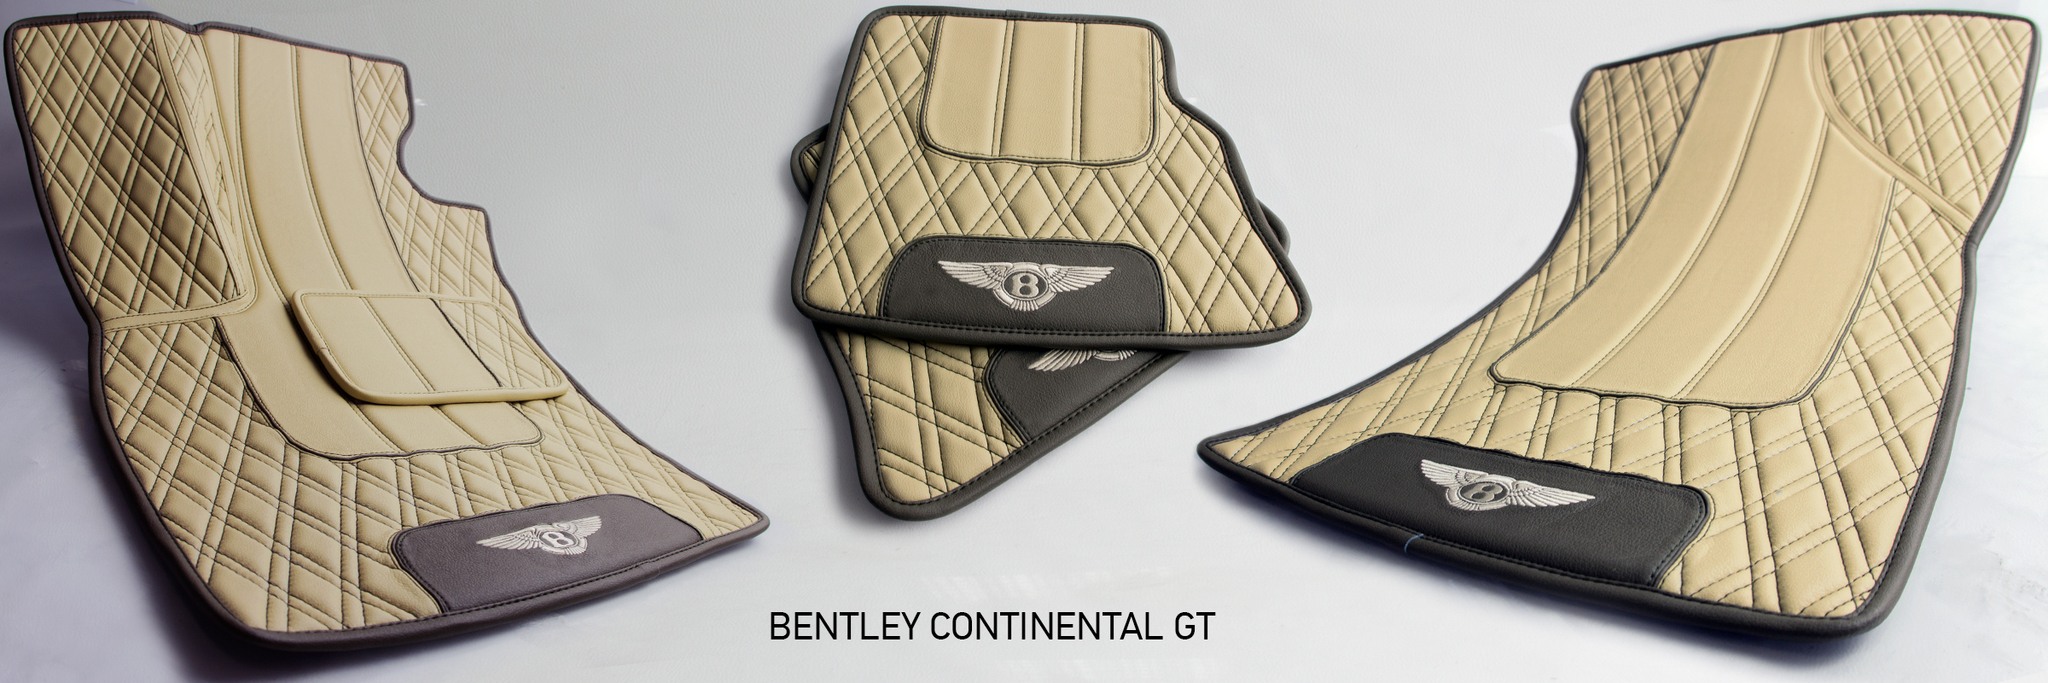 images-products-1-98-232988770-BENTLEY_CONTINENTAL_GTц.jpg